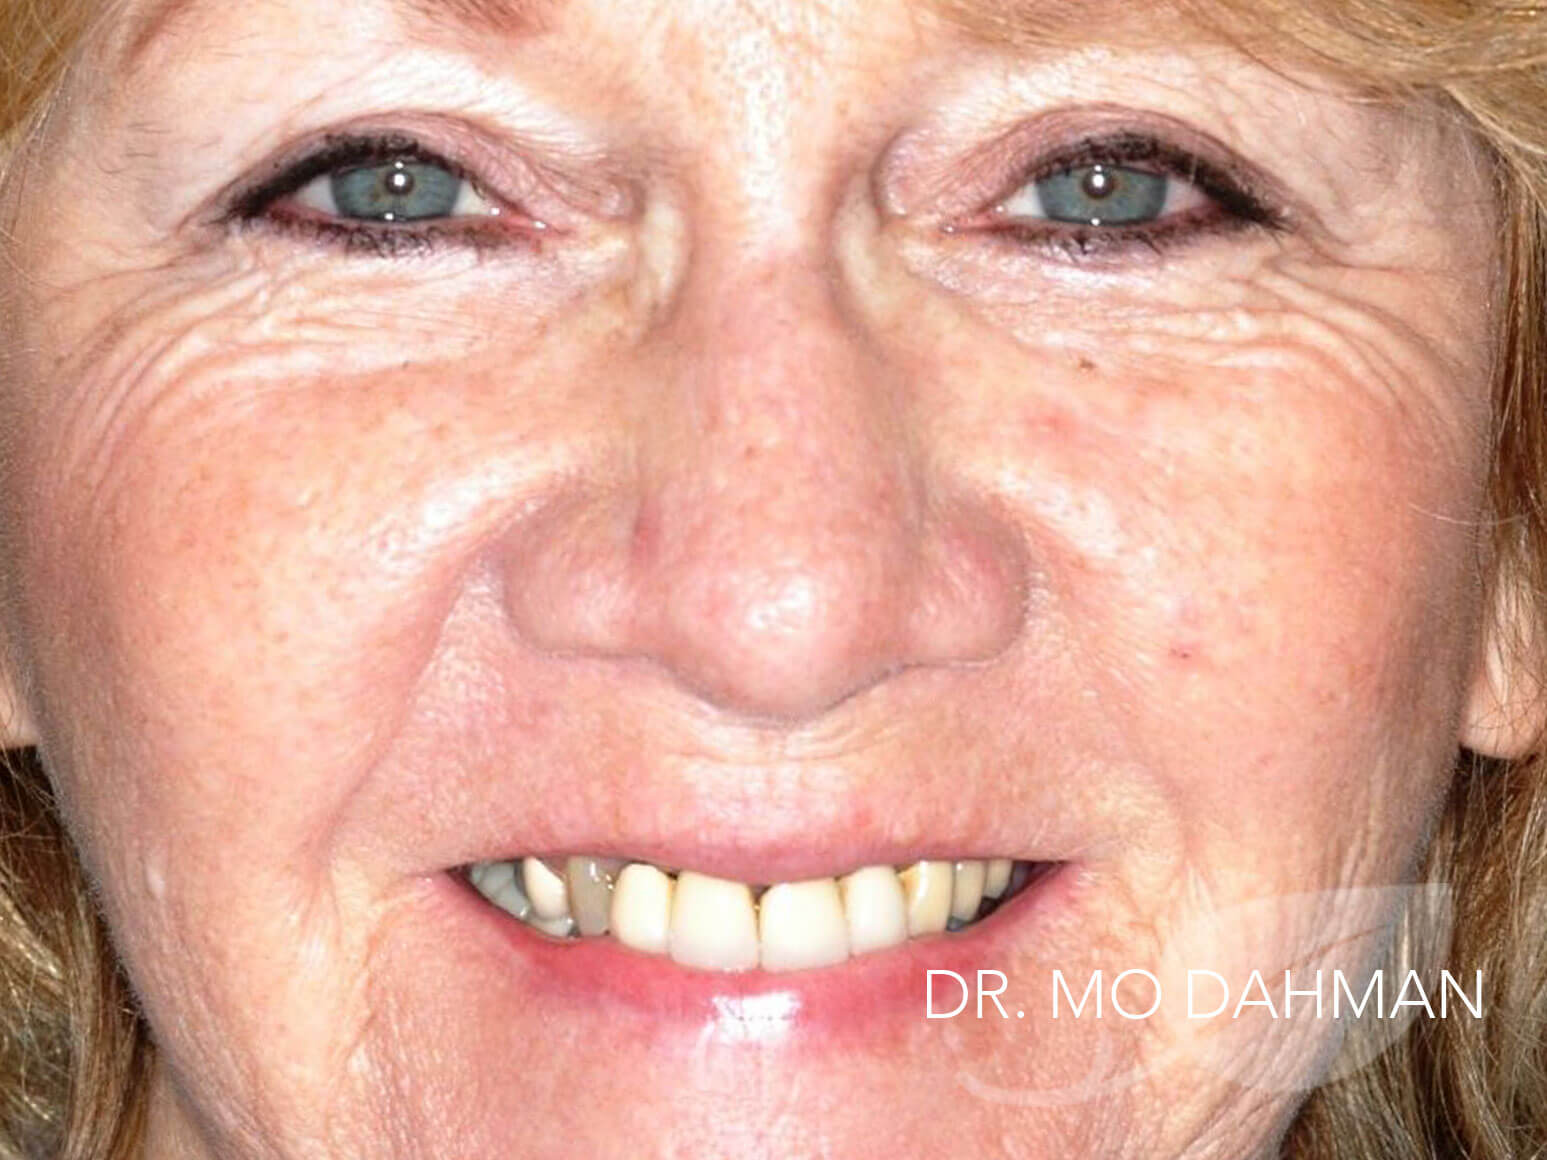 Case 06 full face smiling before treatment